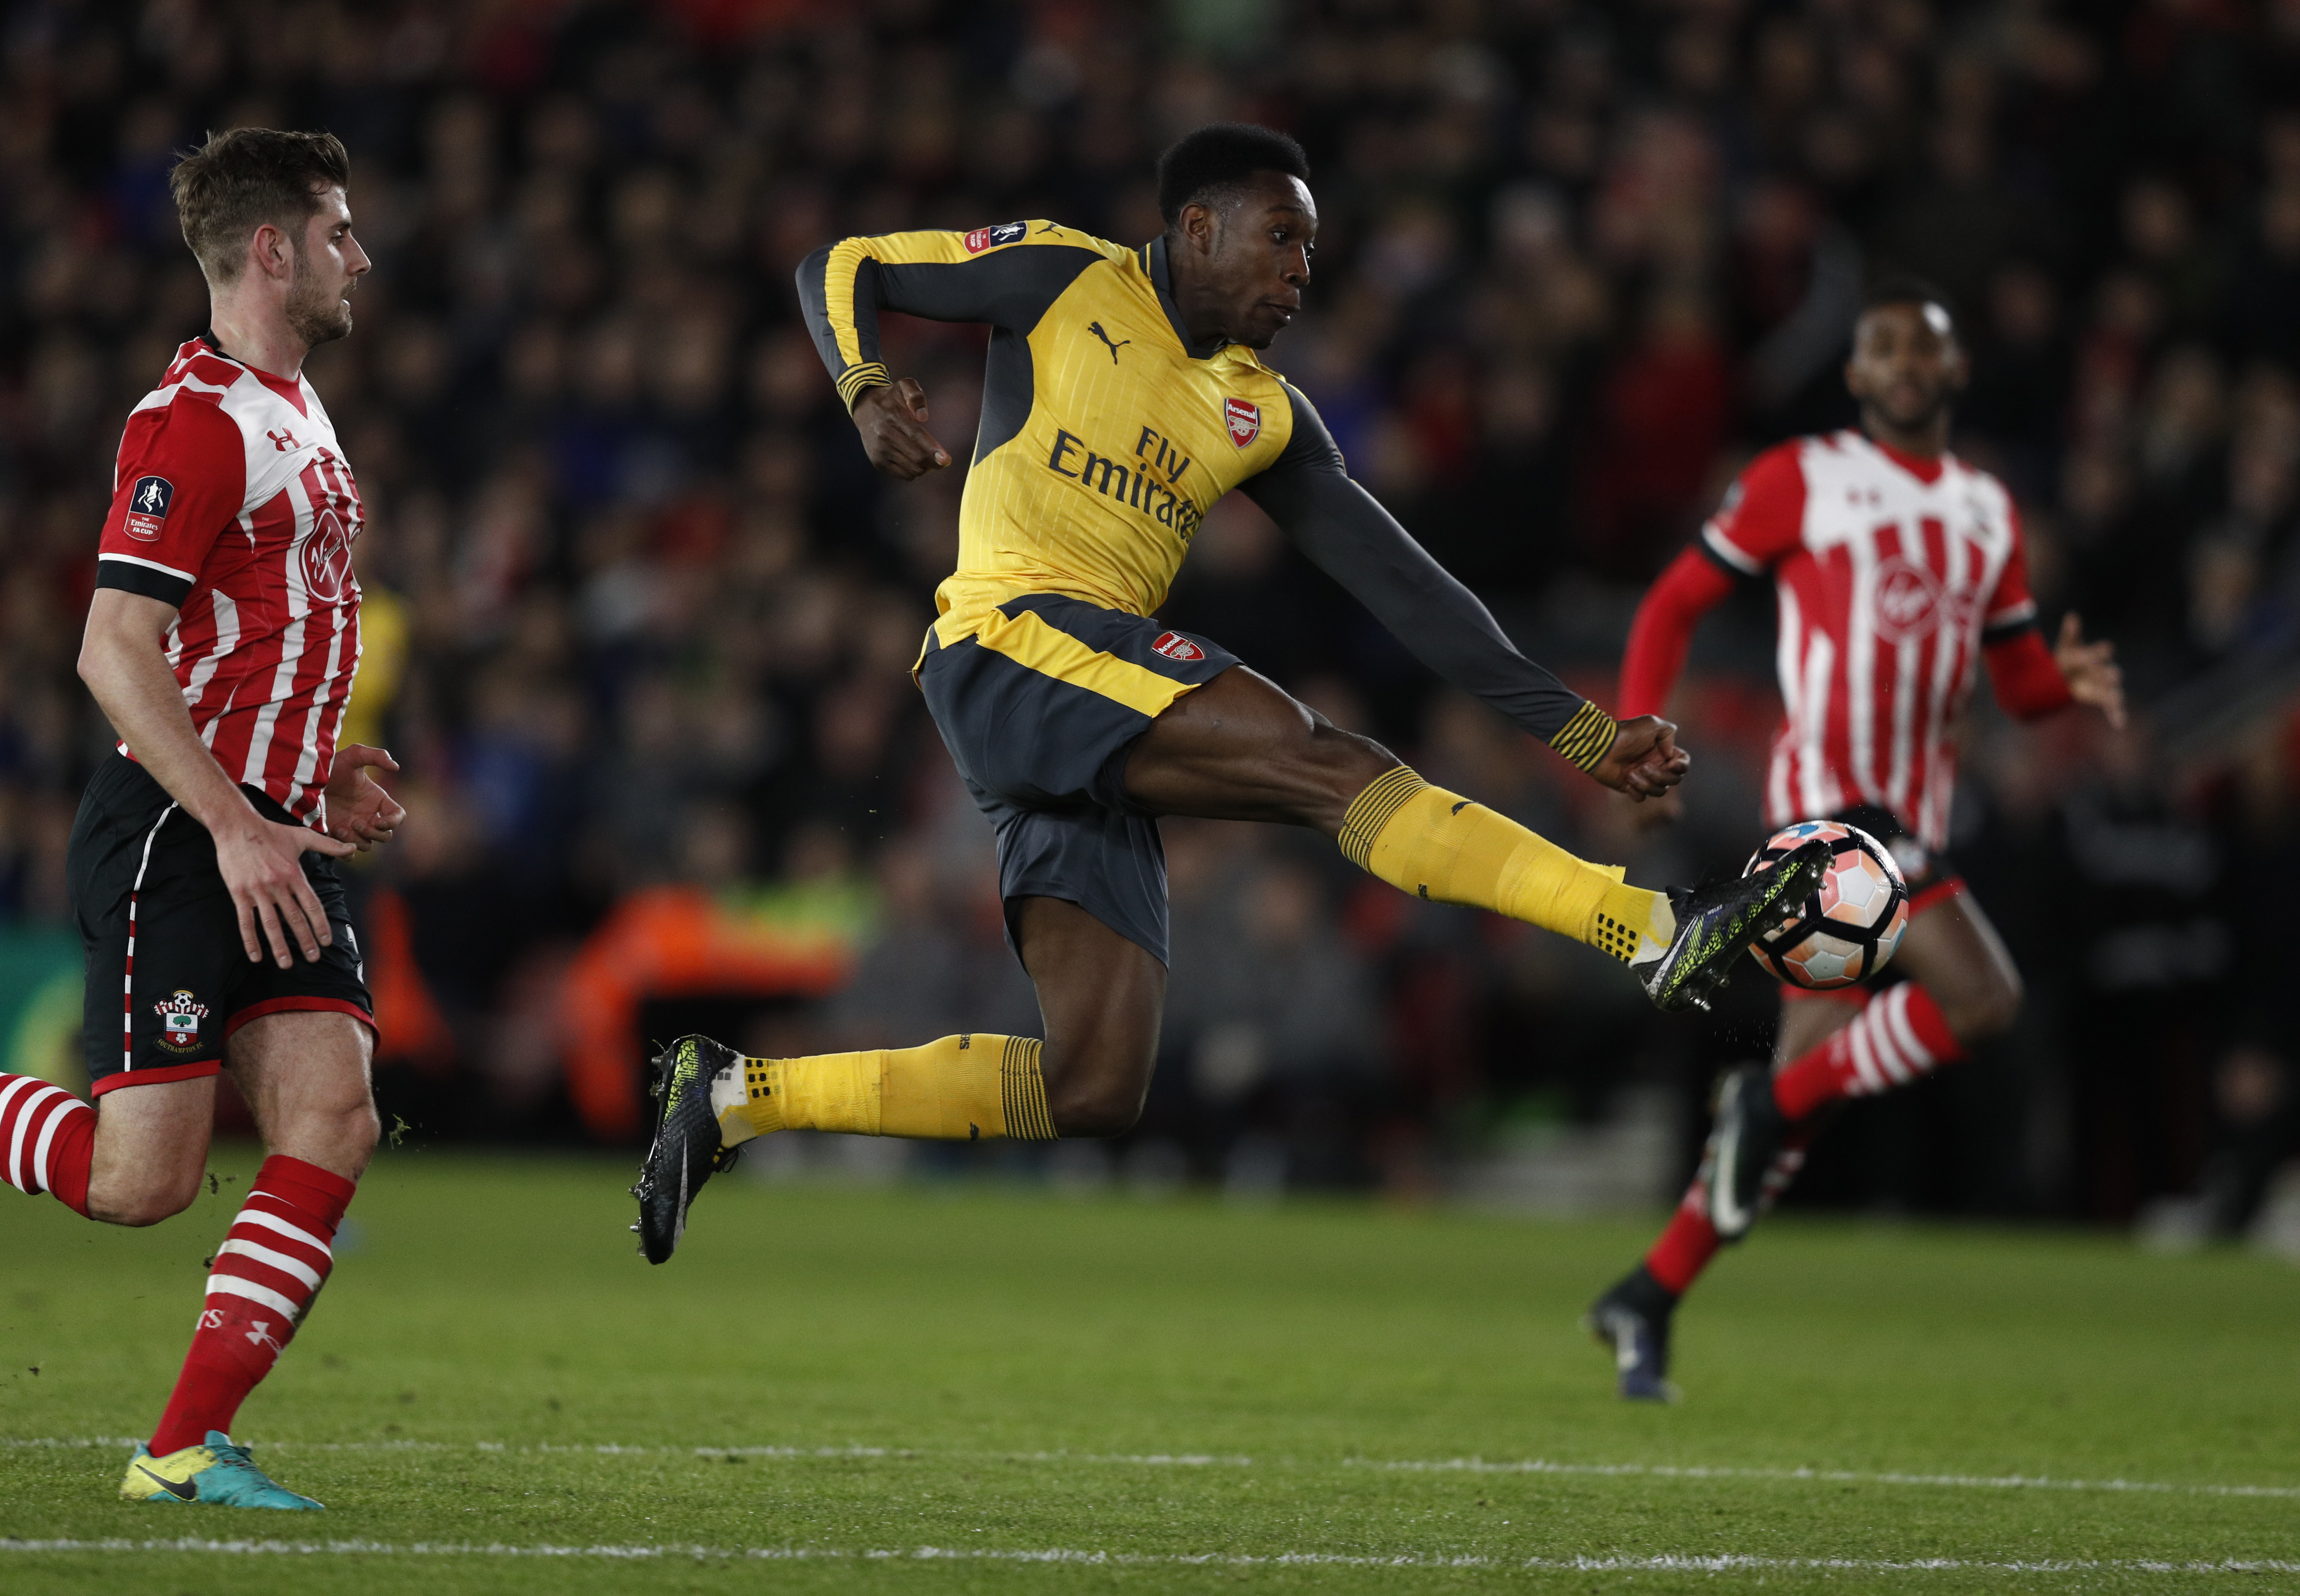 Arsenal's English striker Danny Welbeck (C) scores his team's second goal during the English FA Cup fourth round football match between Southampton and Arsenal at St Mary's in Southampton, southern England on January 28, 2017. / AFP / Adrian DENNIS / RESTRICTED TO EDITORIAL USE. No use with unauthorized audio, video, data, fixture lists, club/league logos or 'live' services. Online in-match use limited to 75 images, no video emulation. No use in betting, games or single club/league/player publications.  /         (Photo credit should read ADRIAN DENNIS/AFP/Getty Images)